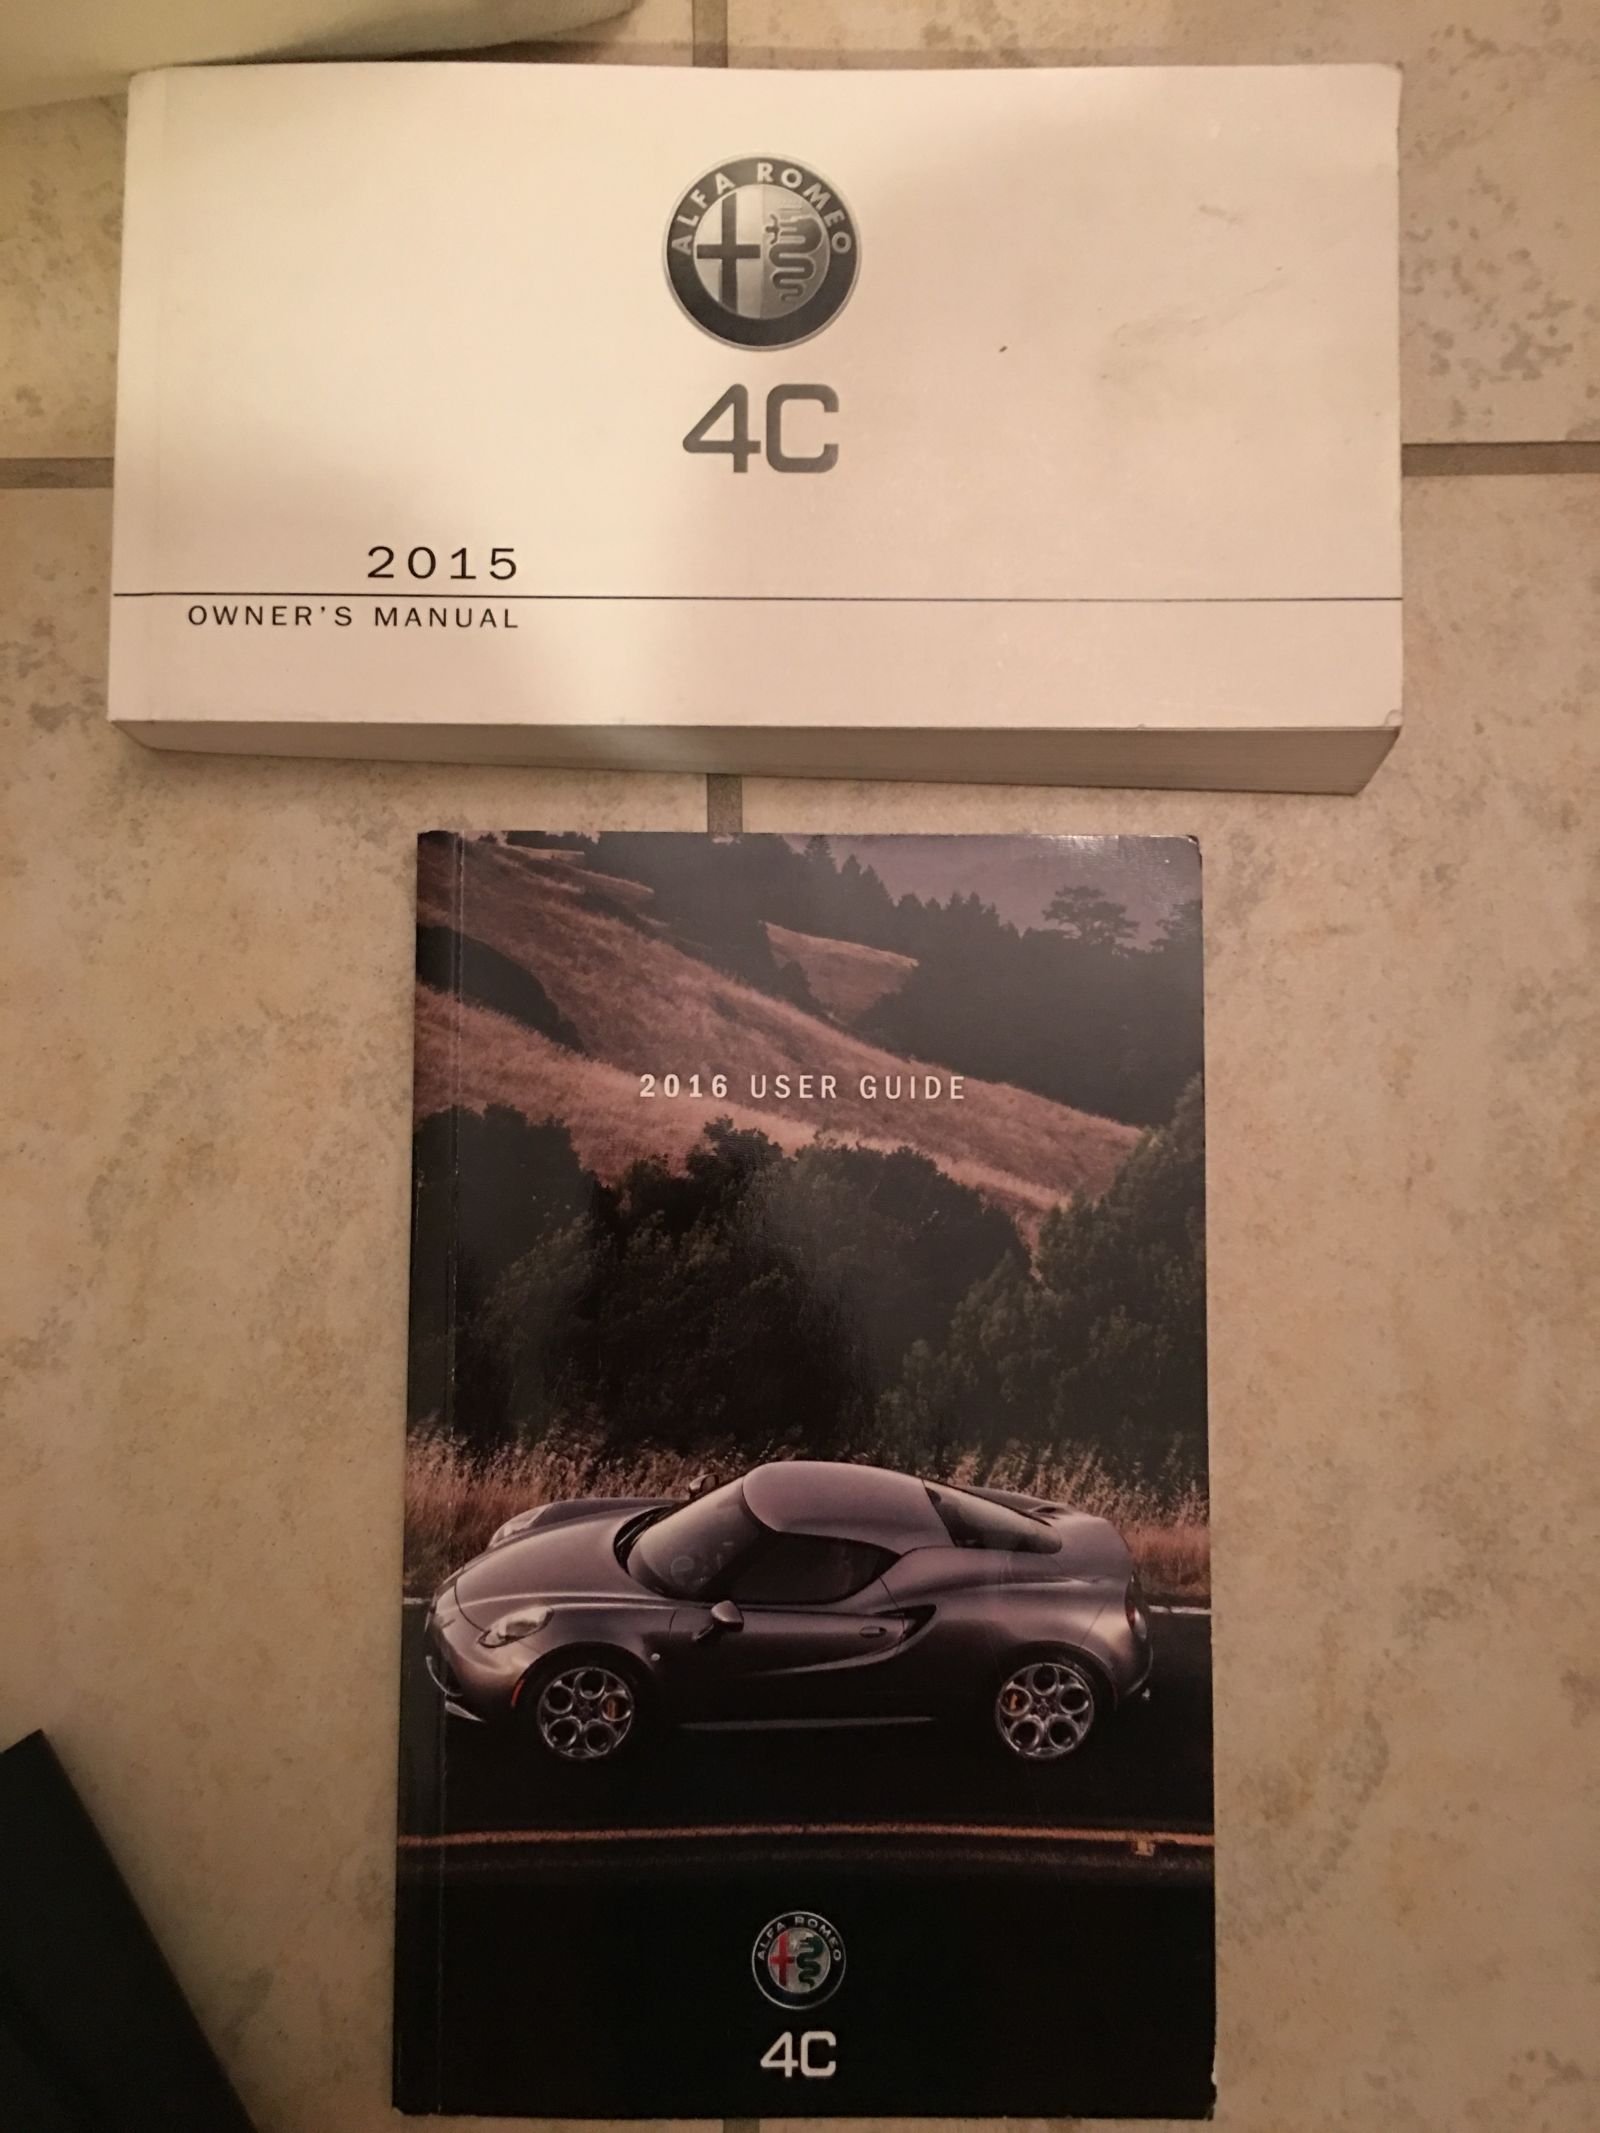 The final laugh comes from the “Owner’s Manual,” which is marked model year 2015, and the “User Guide” which is marked 2016.